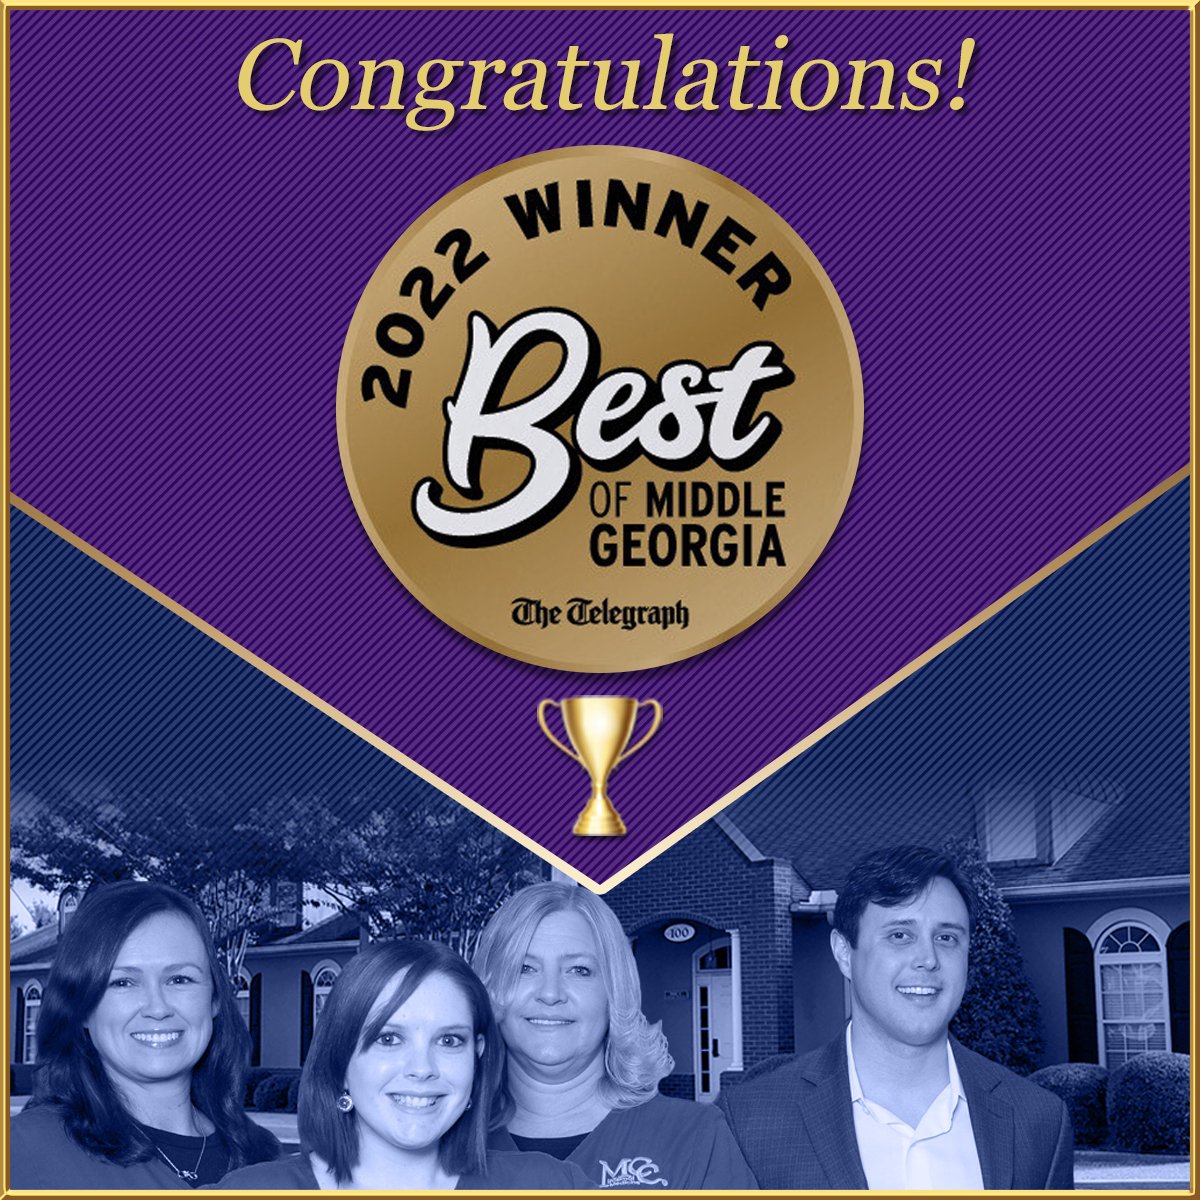 ICYMI!

MCC Internal Medicine is very
proud to announce that our practice has been selected
as the Best of Middle Georgia!

MCC placed GOLD for Best Family Medicine, making it the 1st place, top-rated selection amongst the voting this year. 

Results at
BestofMiddleGeorgia.com.